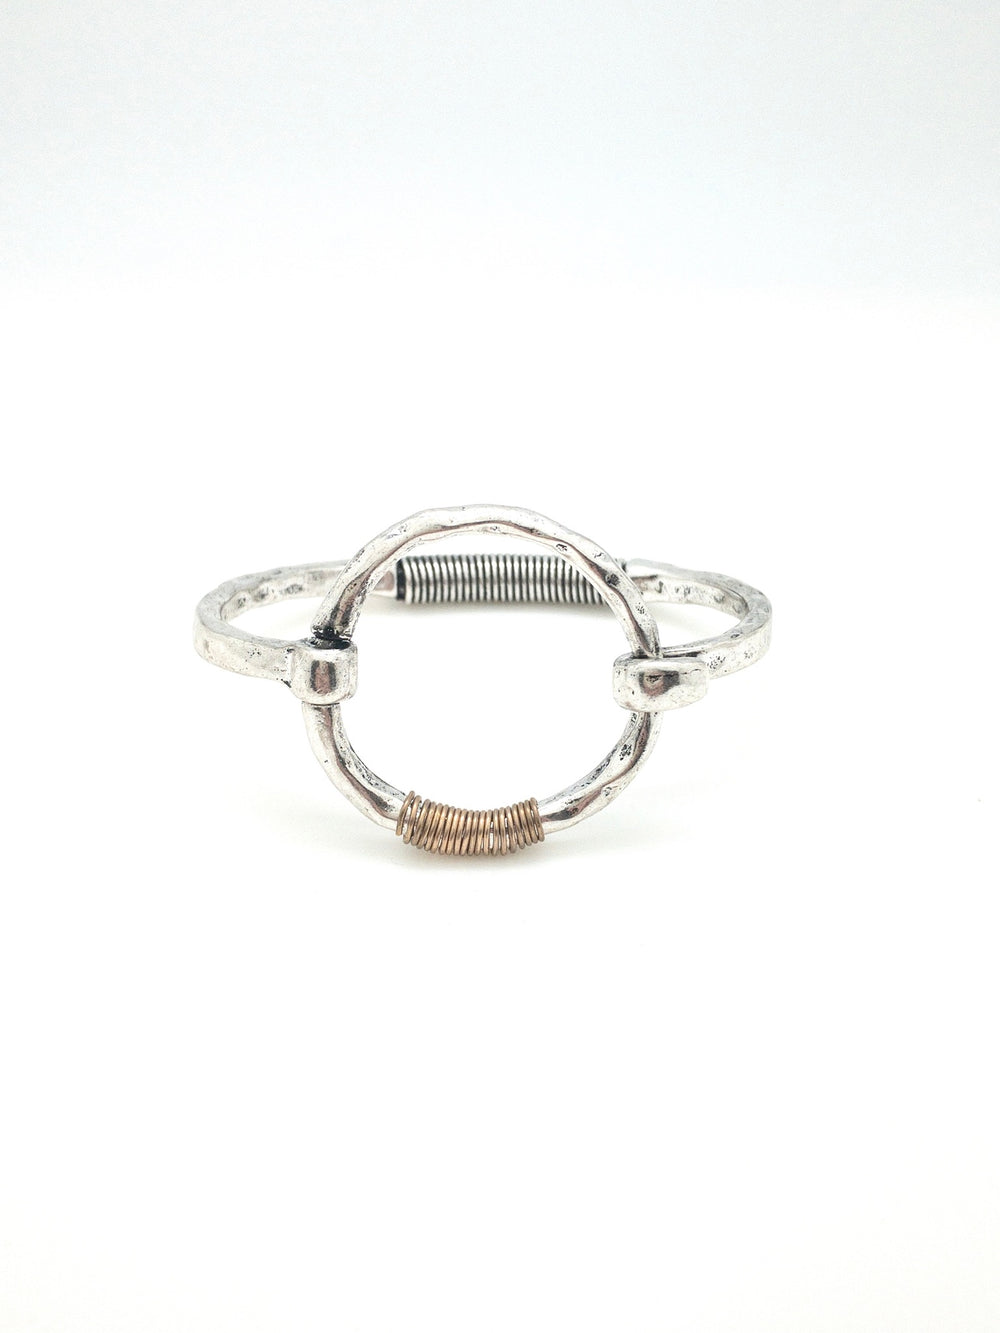 Silver cuff with a circle in center. gold wire wrapping.